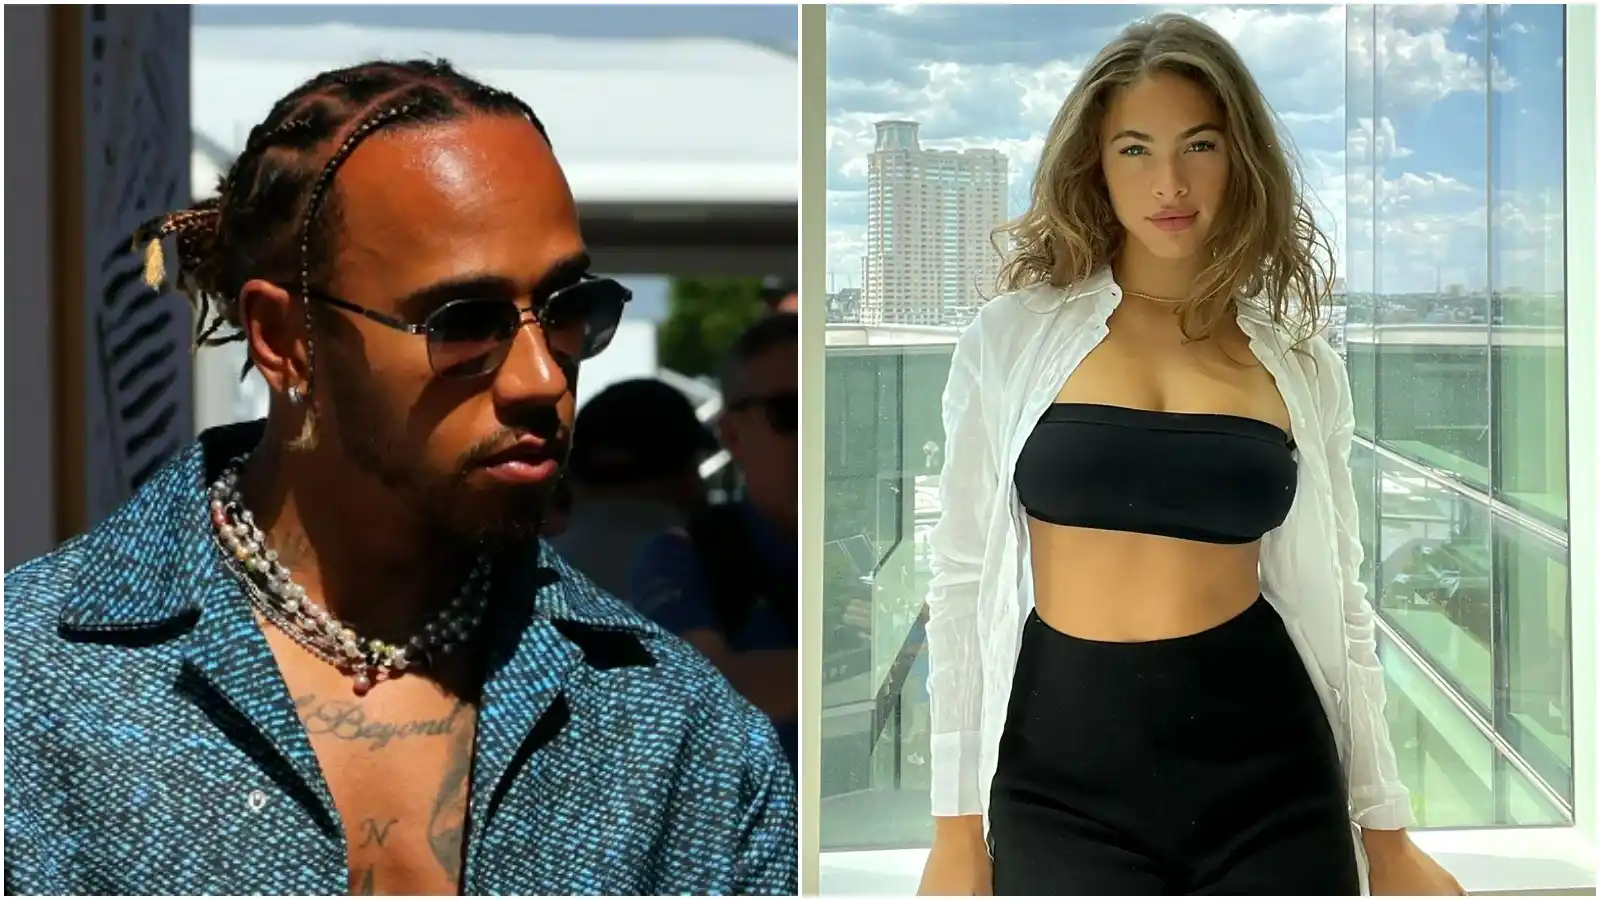 Is F1 Racer Lewis Hamilton Married To Camila Kendra? Wife, Relationship Timeline And Dating History